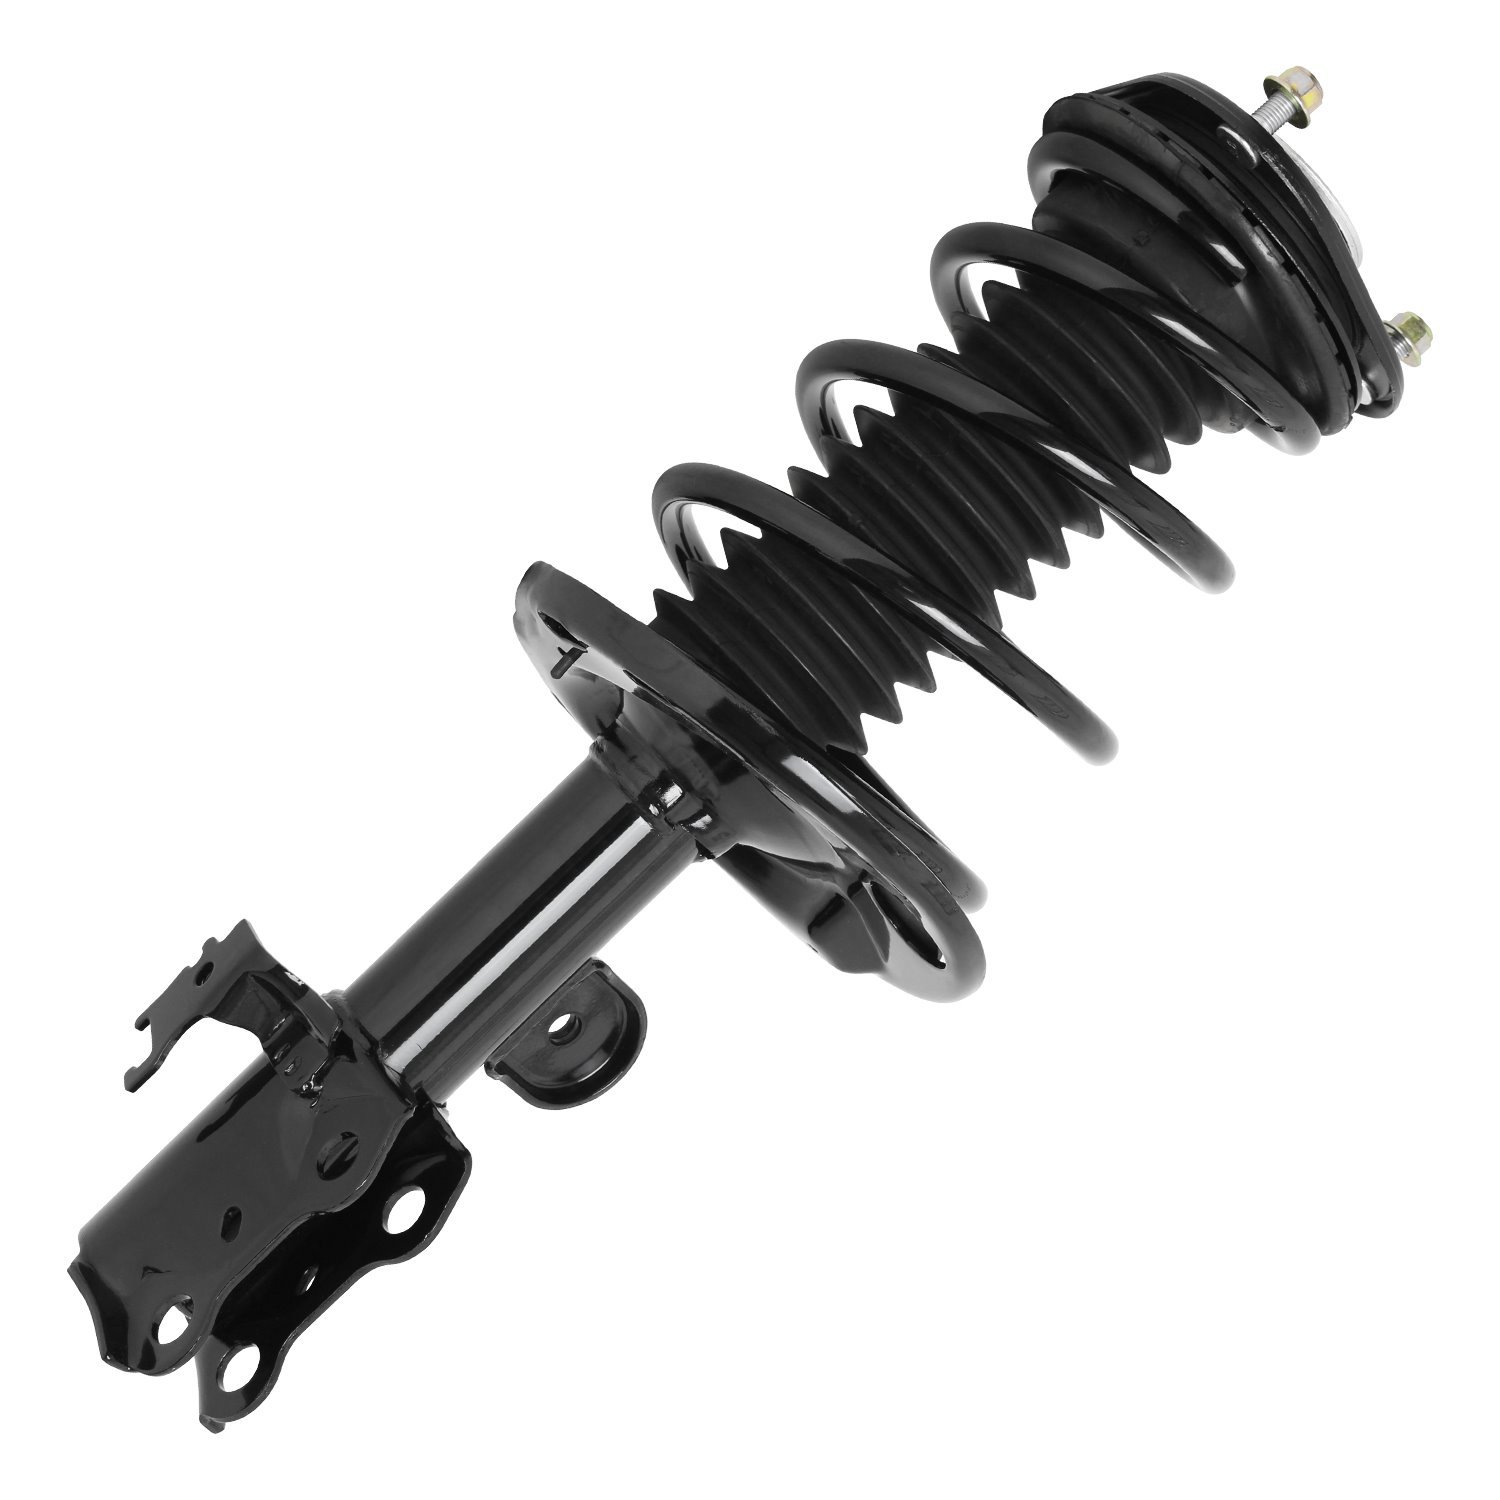 11804 Suspension Strut & Coil Spring Assembly Fits Select Toyota Prius V, Scion tC